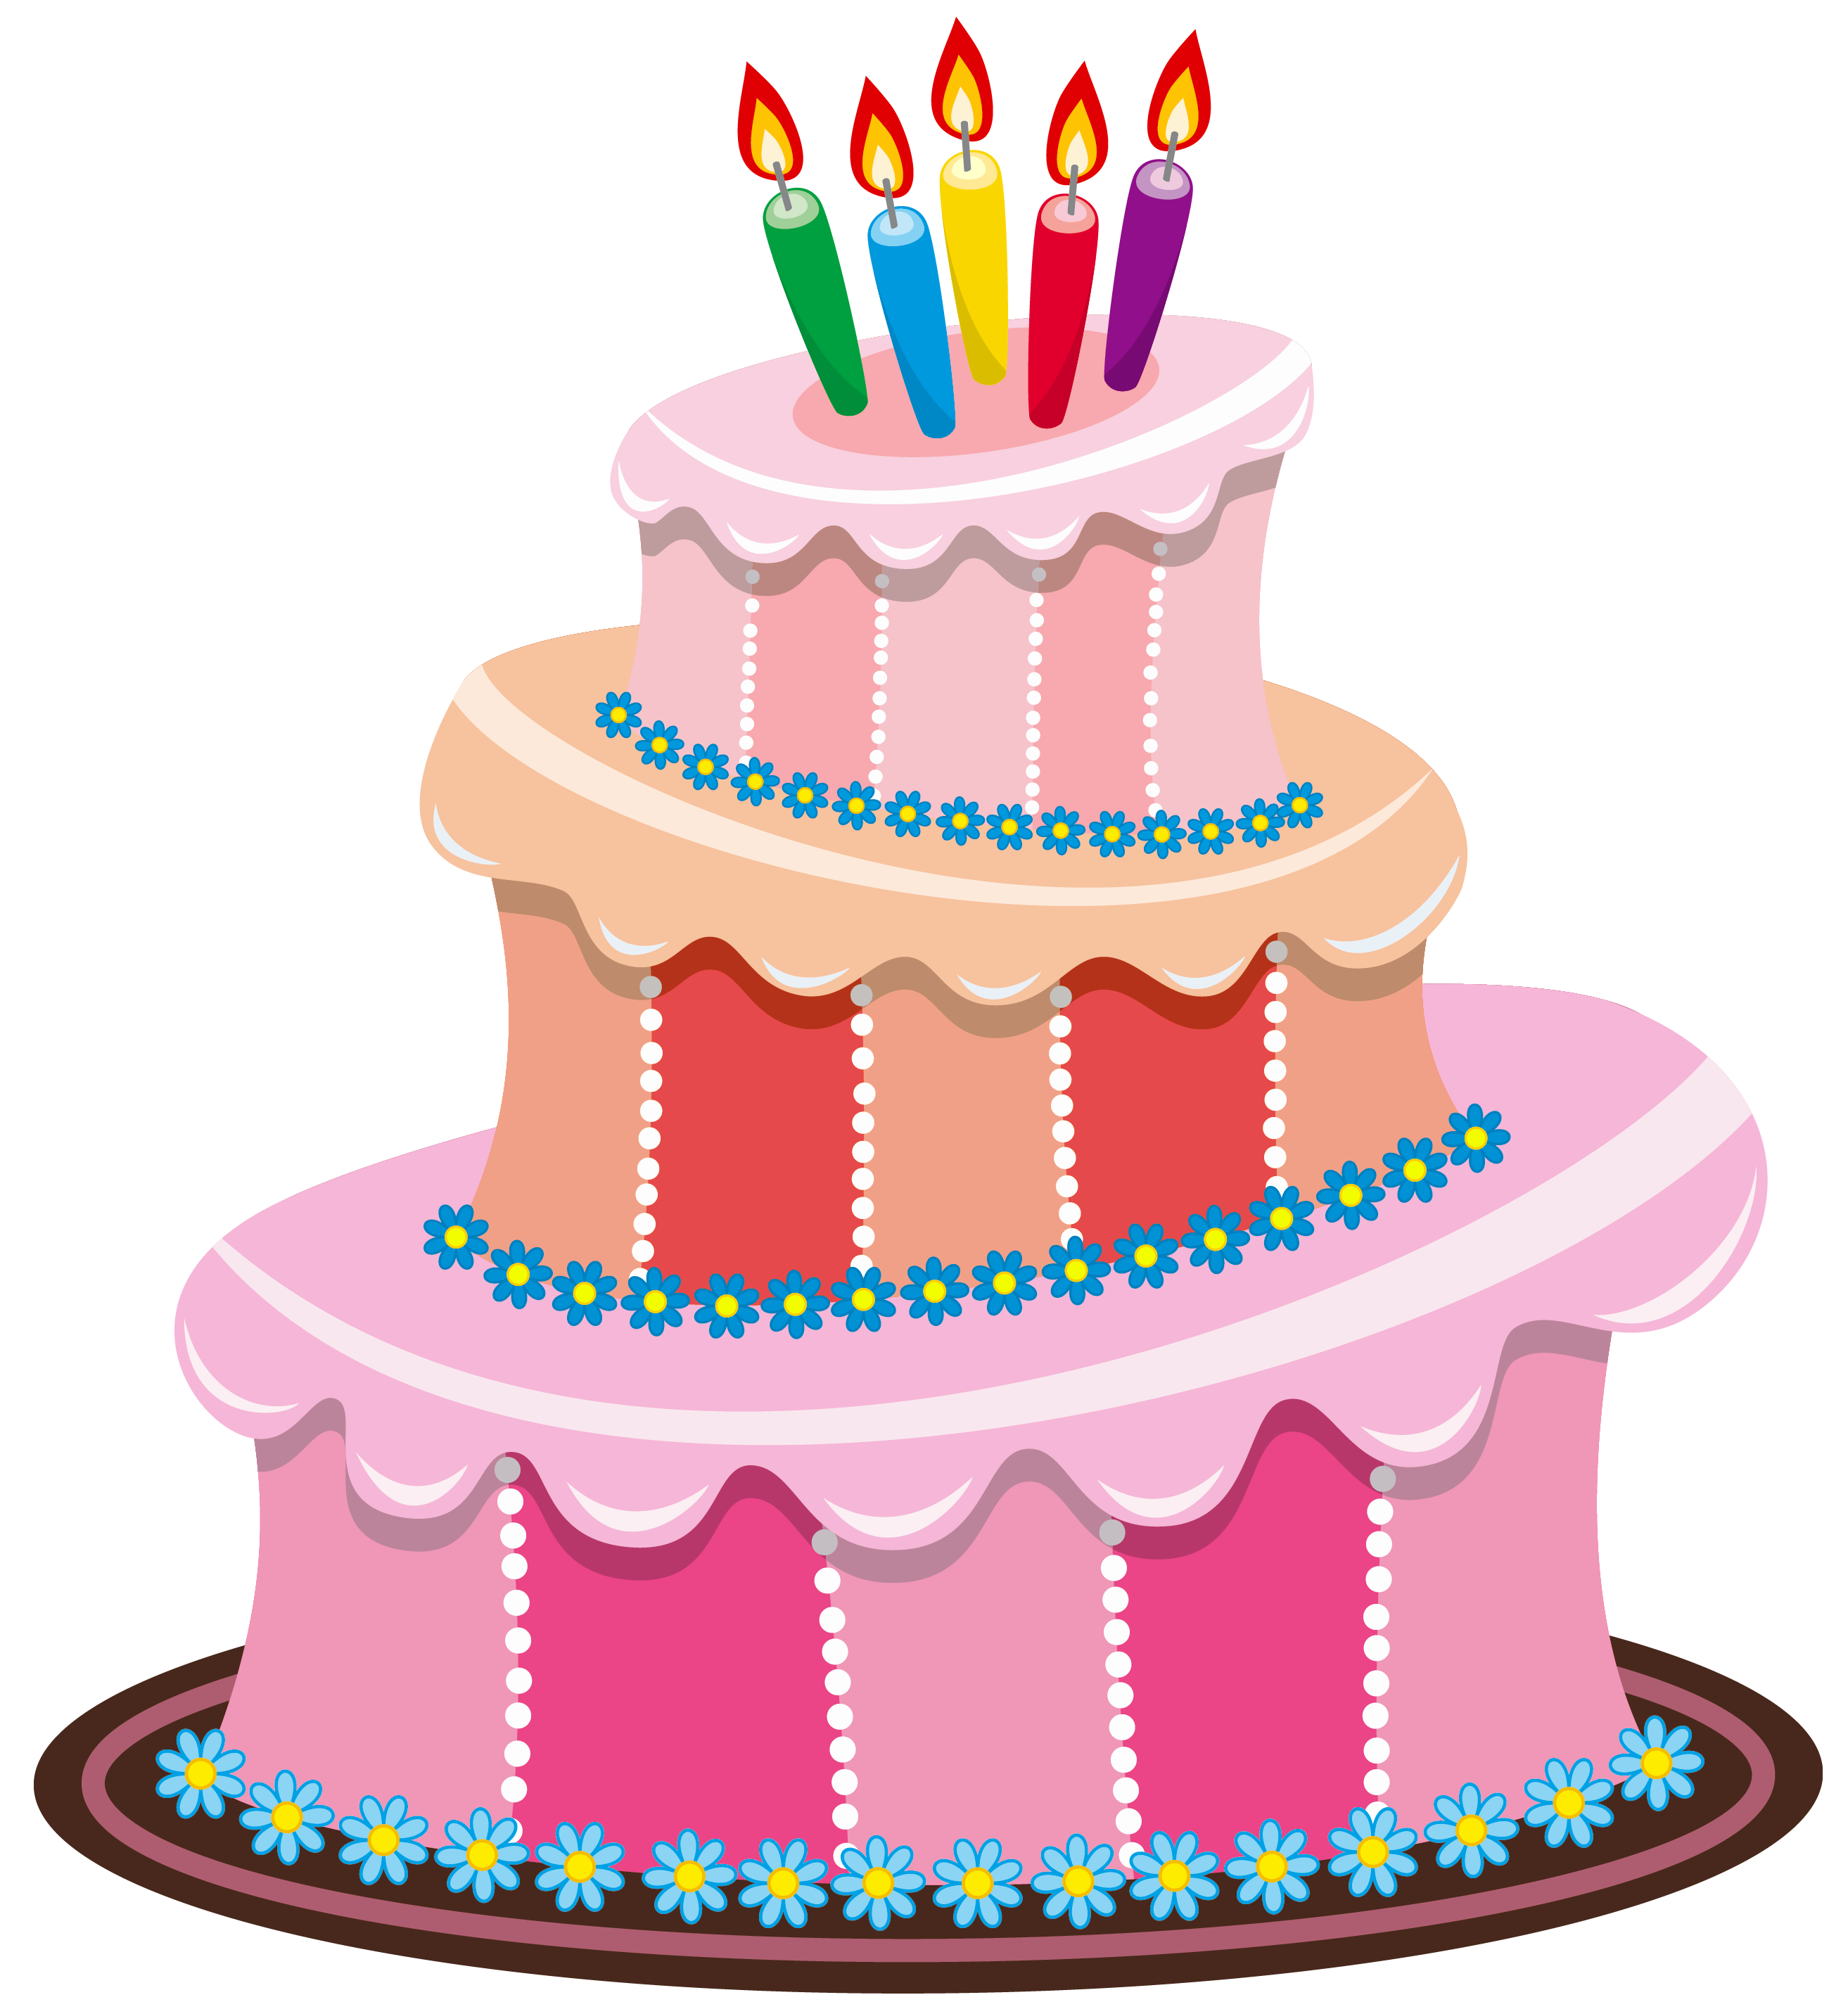 Free Birthday Cake Png Images Download Free Birthday Cake Png Images Png Images Free Cliparts On Clipart Library